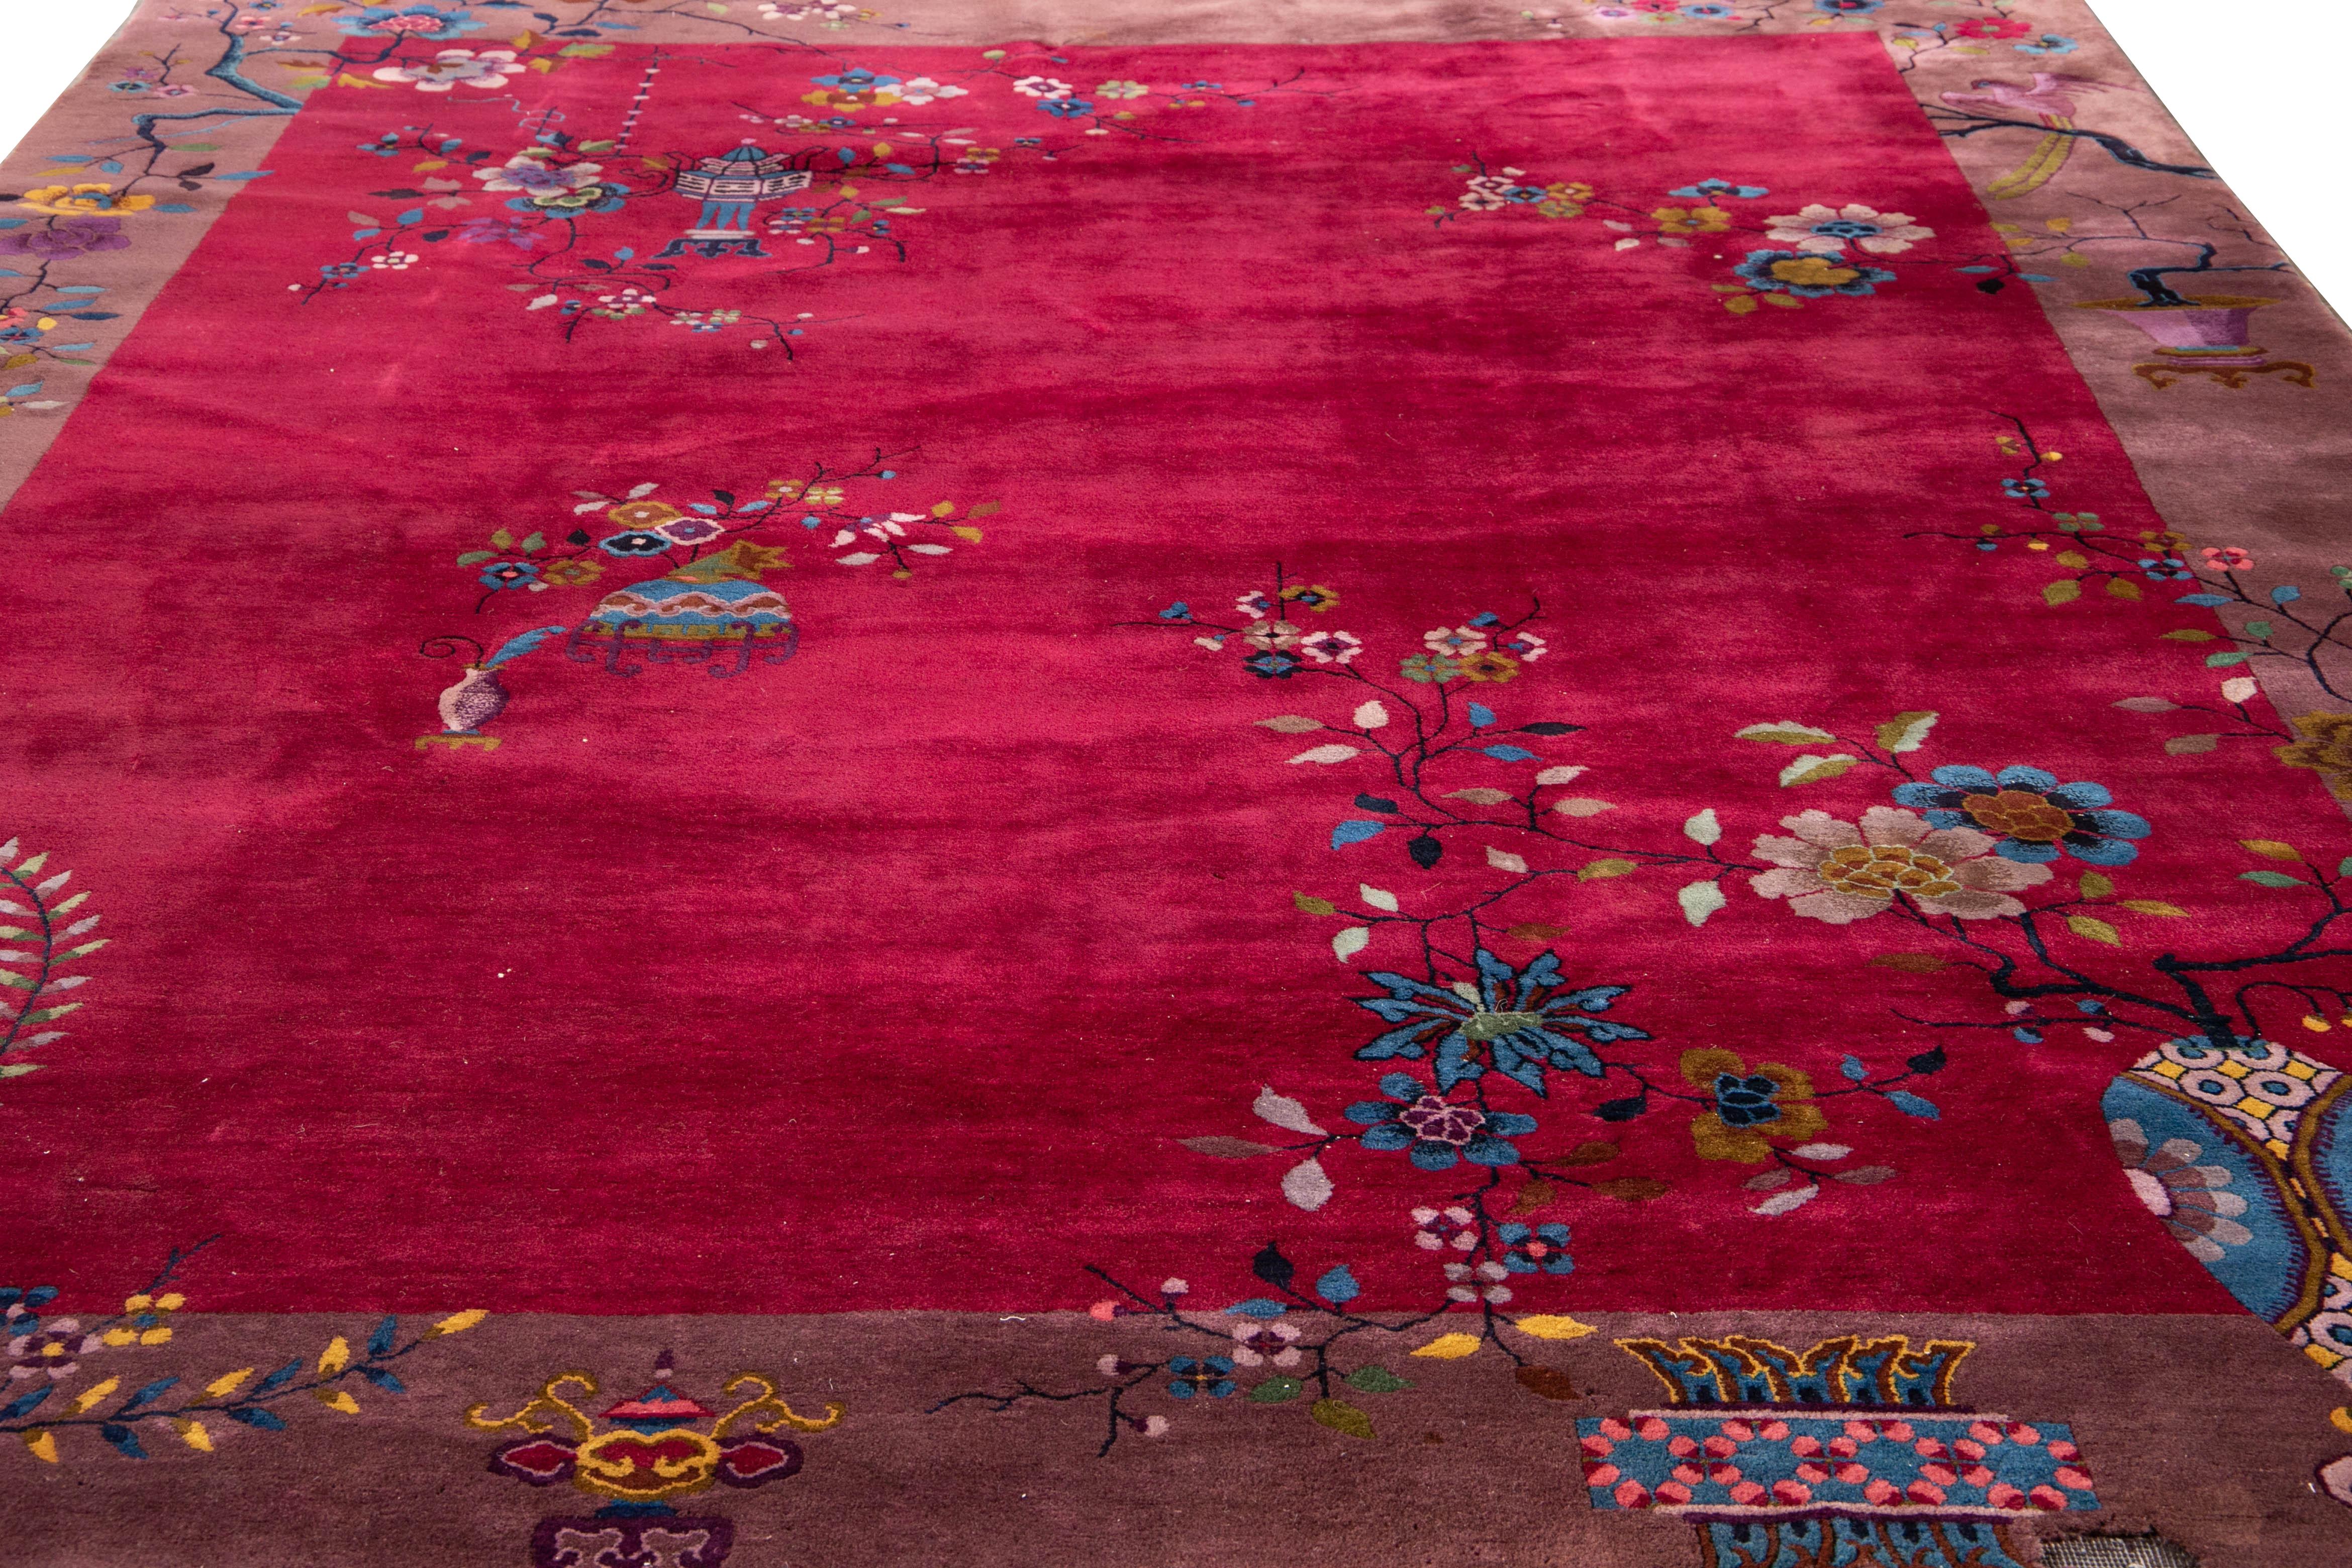 Antique Red Art Deco Chinese Wool Rug 8 Ft 10 In X 11 Ft 4 In. For Sale 1